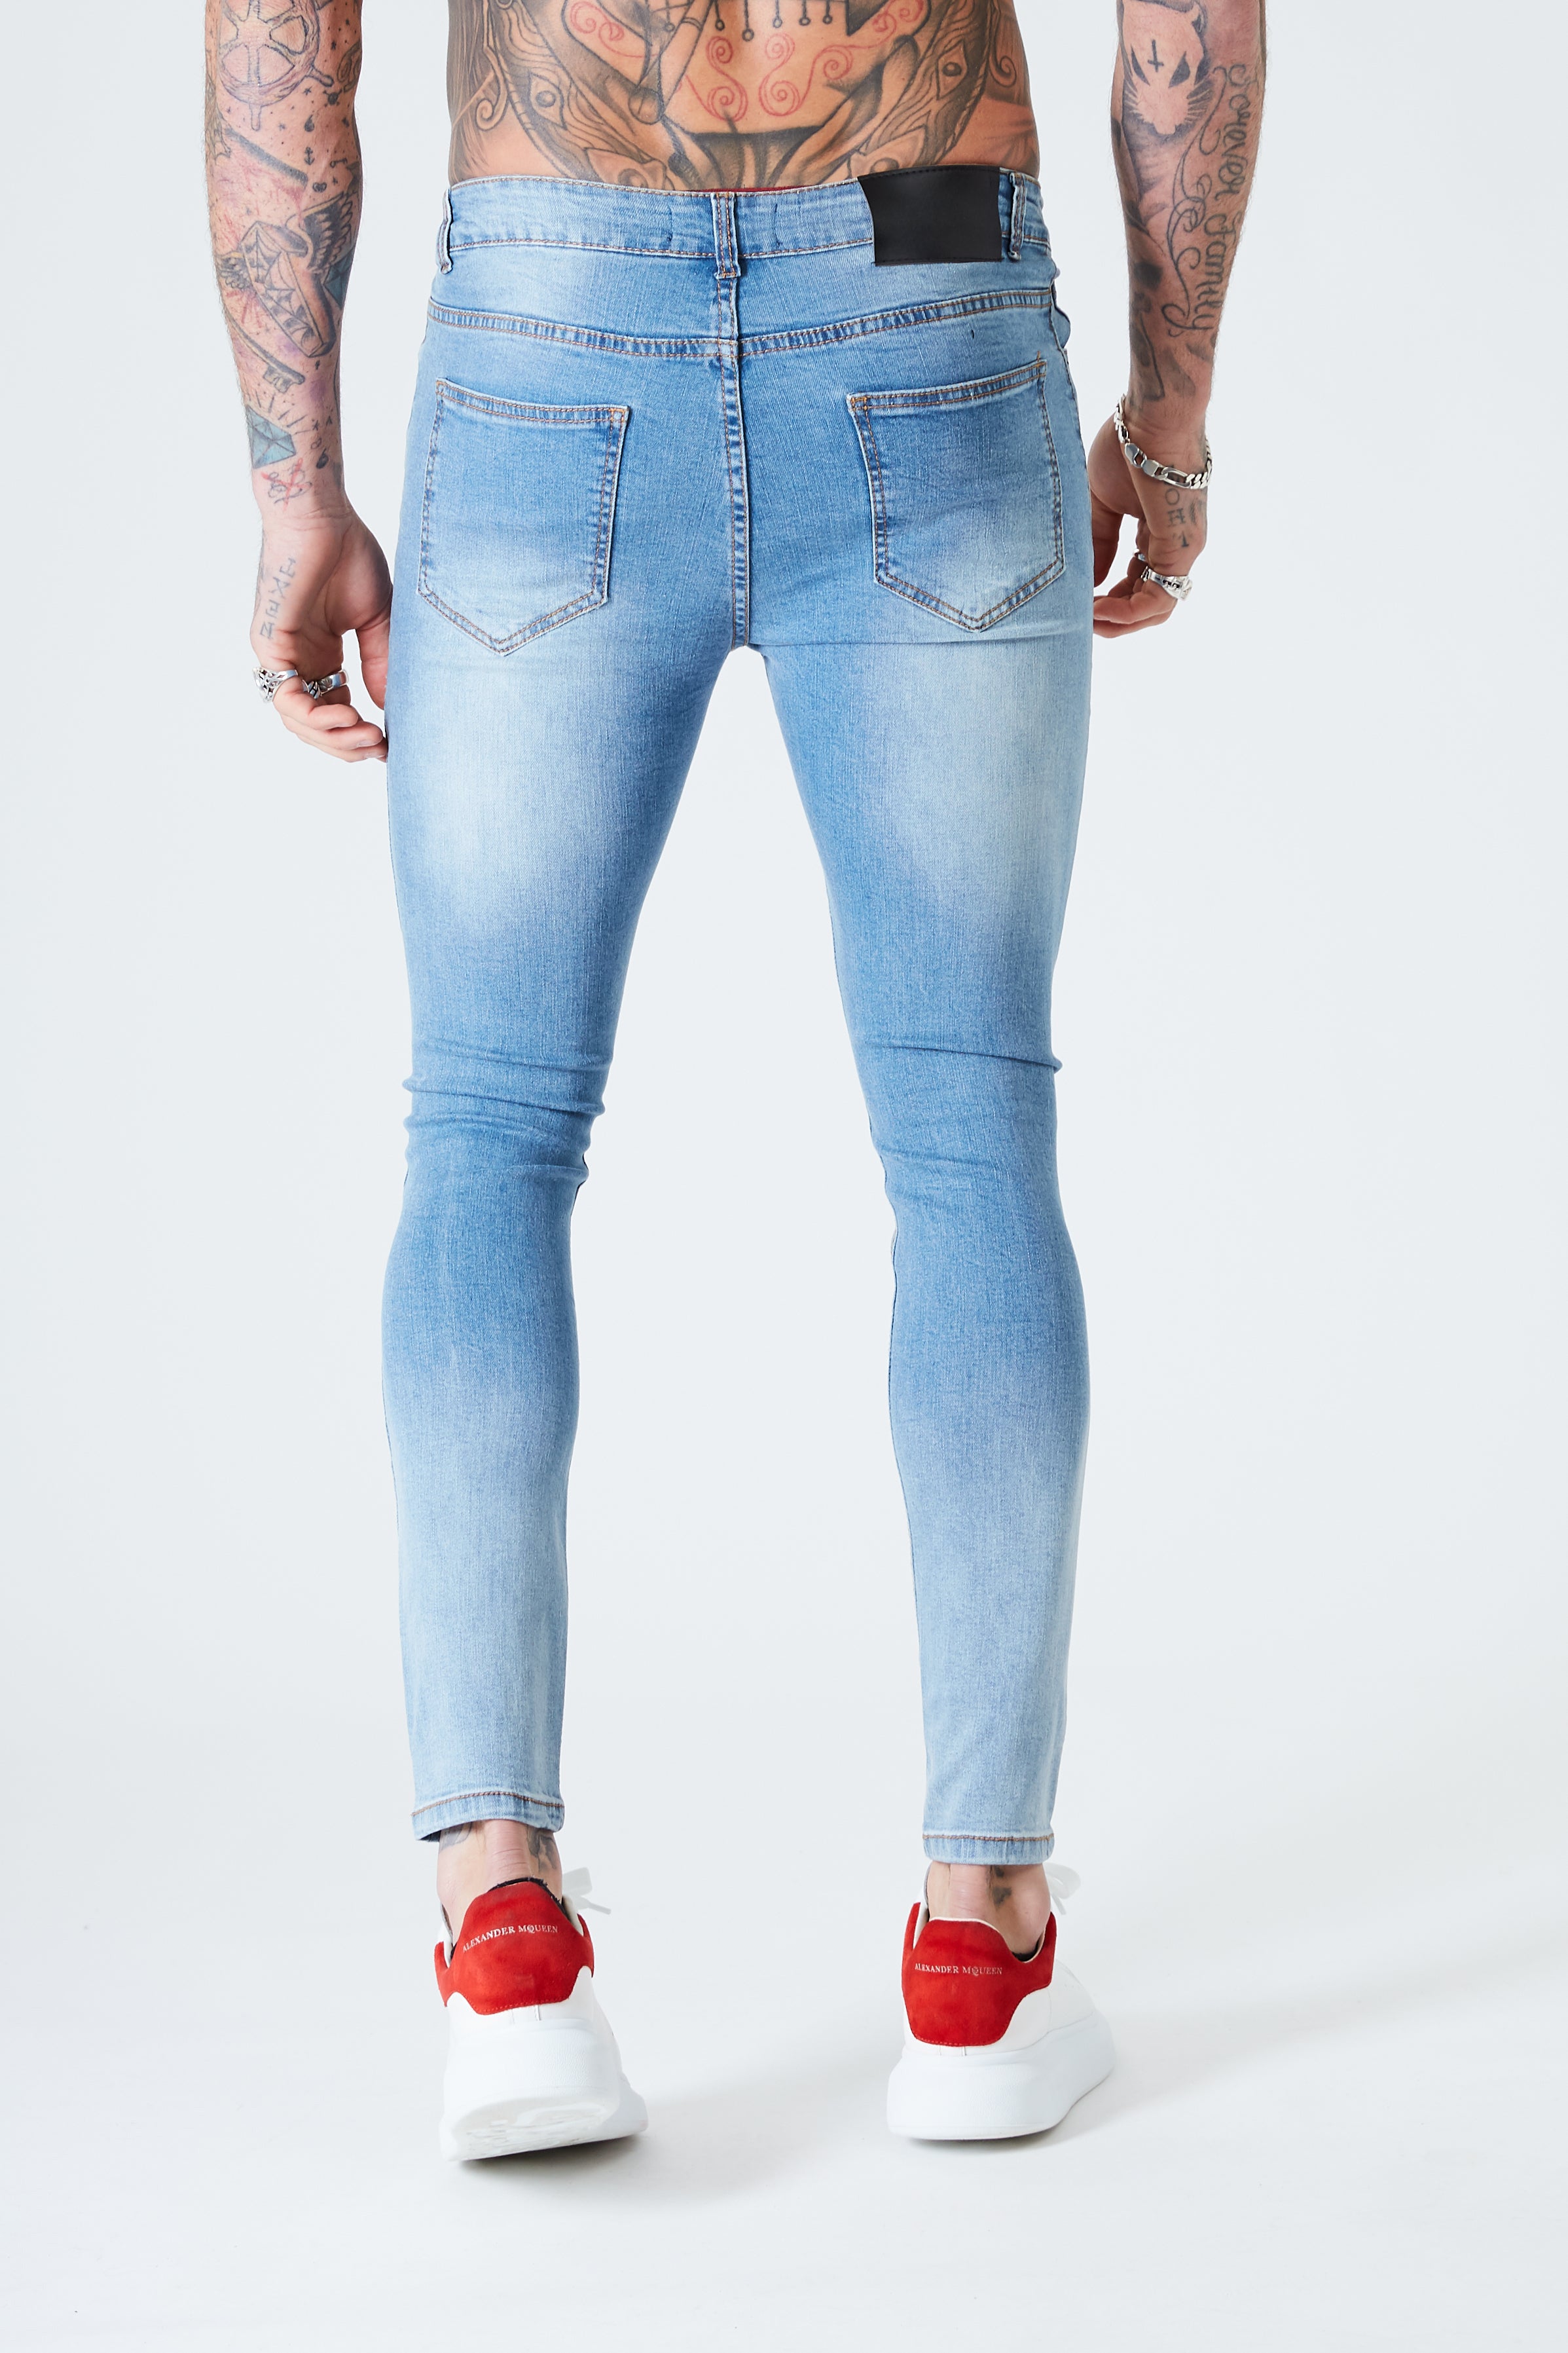 Ripped & Repaired Spray on Jeans - Blue Fade - SAINT JAXON